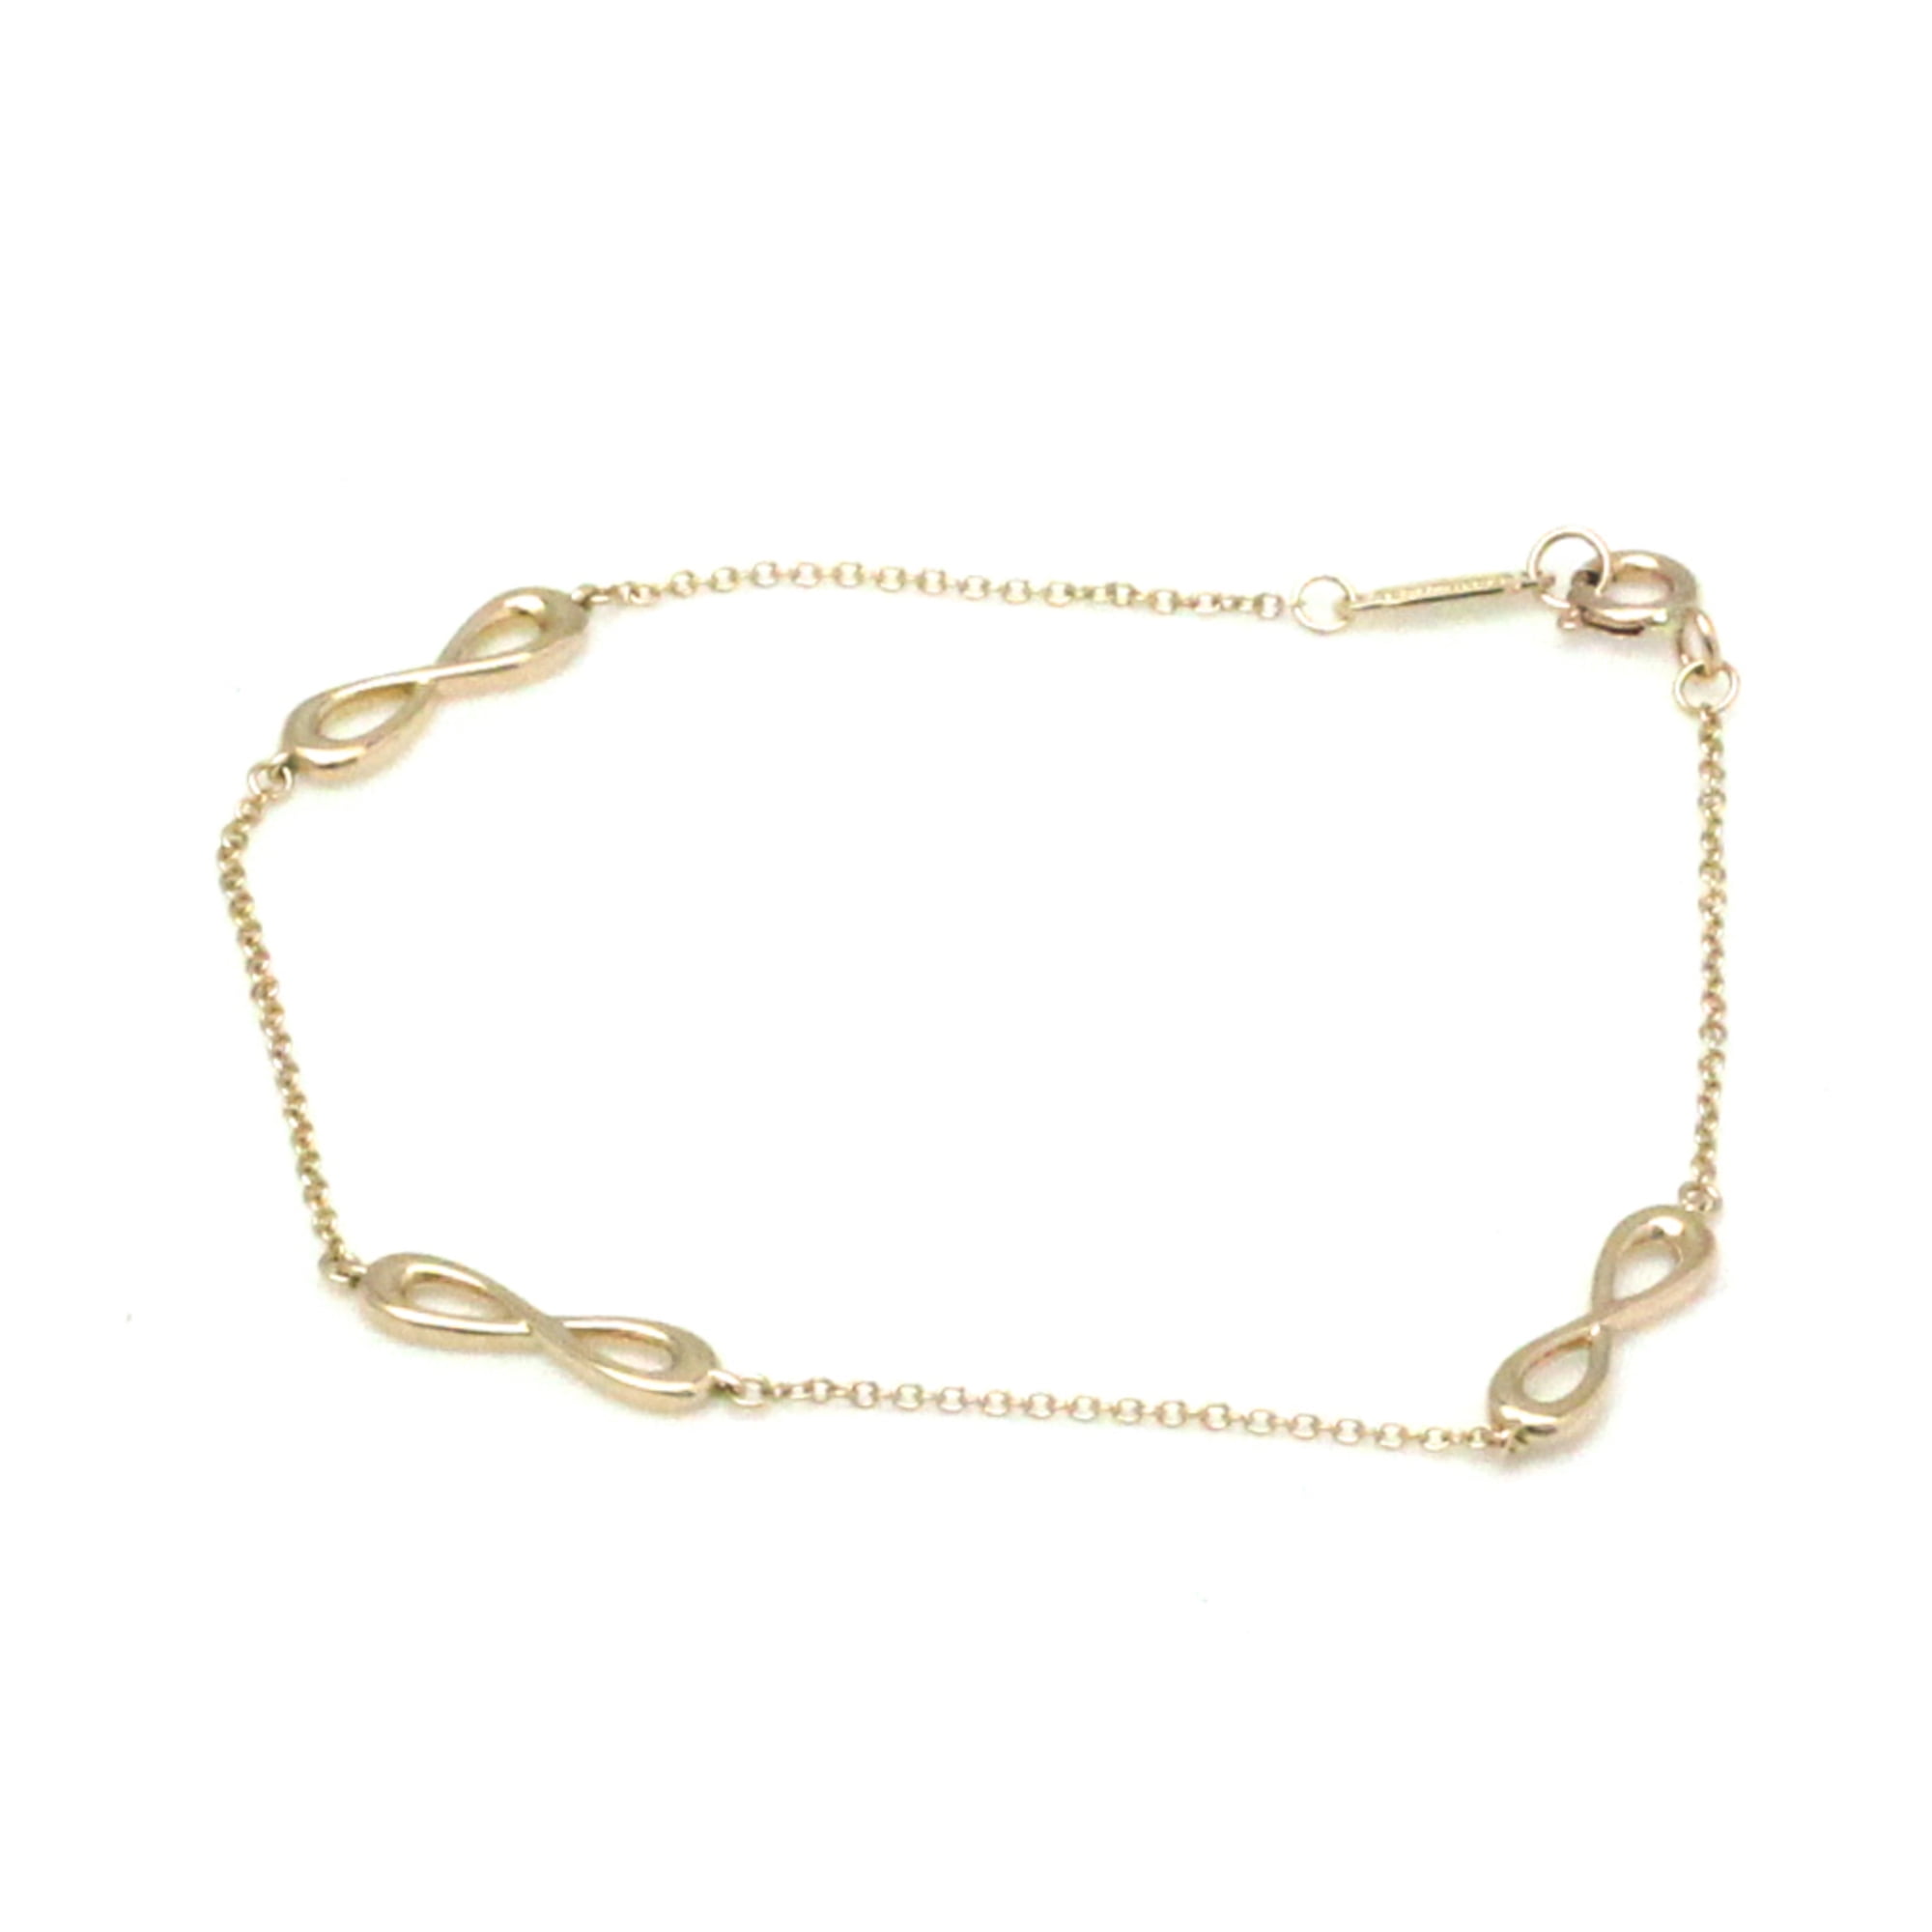 Lot: 1219: Tiffany gold charm bracelet,, Lot Number: 1219, Starting Bid:  $600, Auctioneer: Brunk Auctions, Auction:… | Tiffany gold, Tiffany jewelry,  Charm bracelet